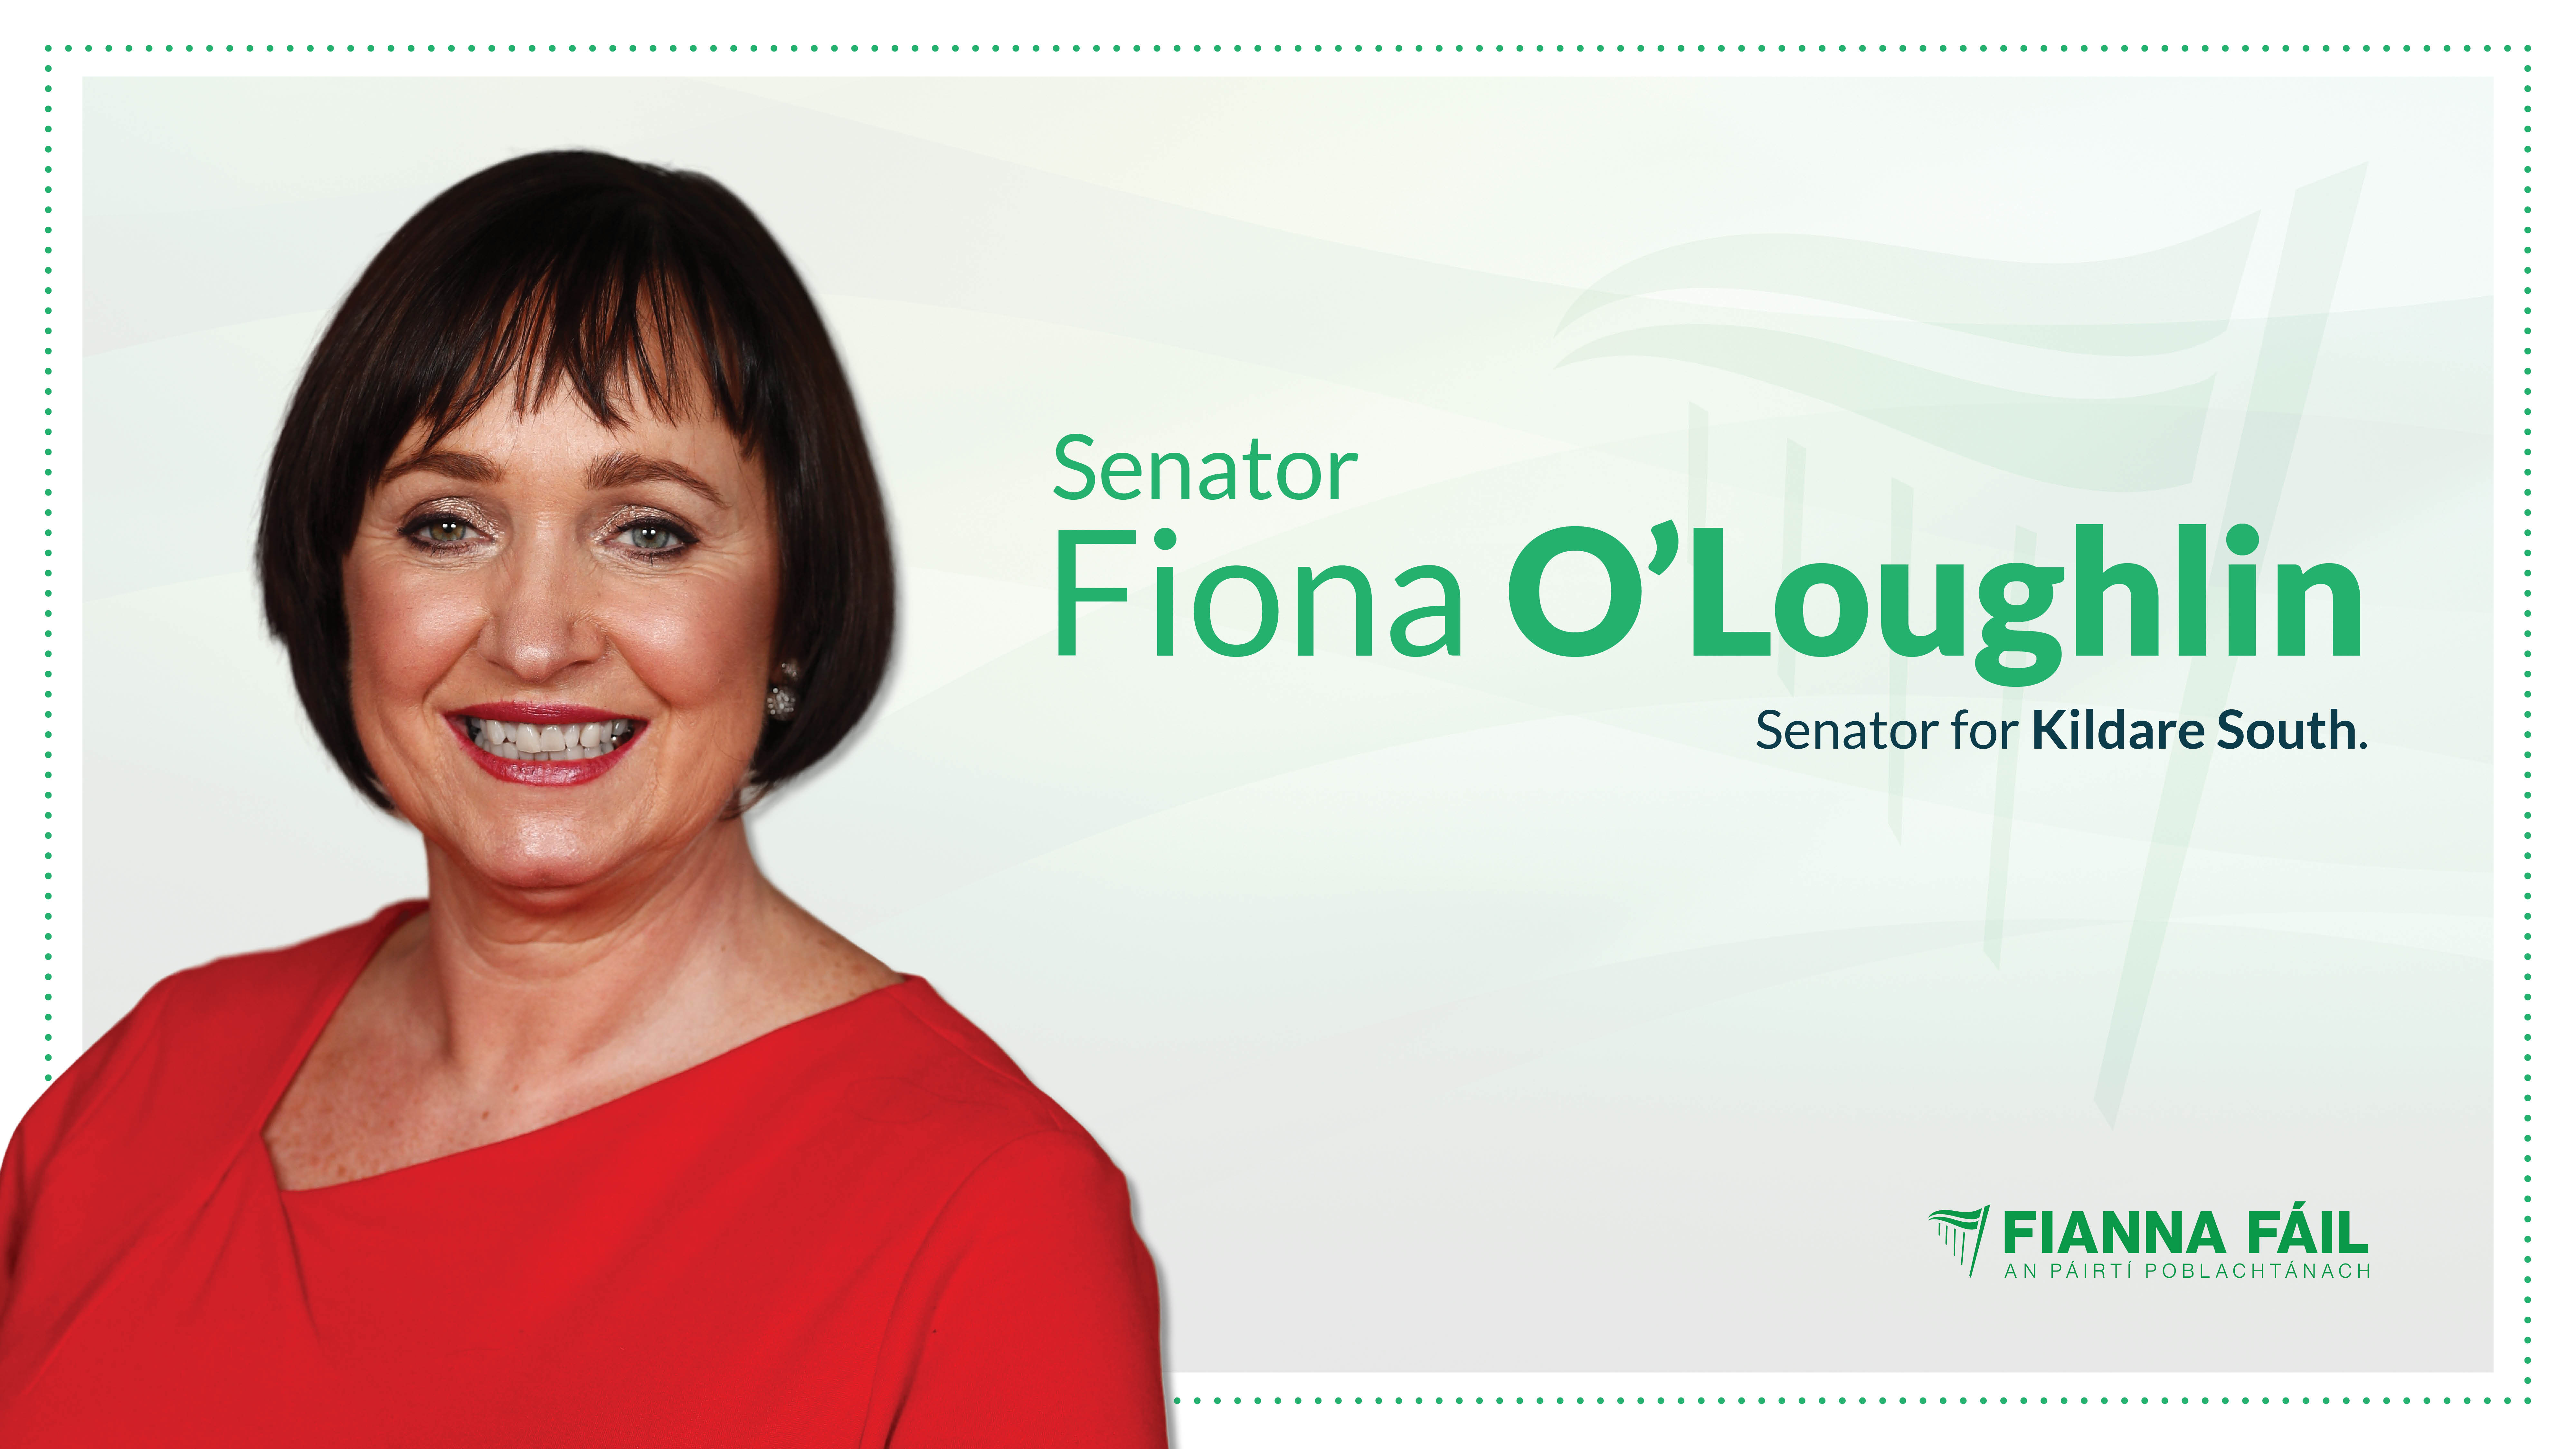 Delay in the issuing of teaching council numbers “absolutely unacceptable” says Fianna Fail Senator Fiona O’Loughlin